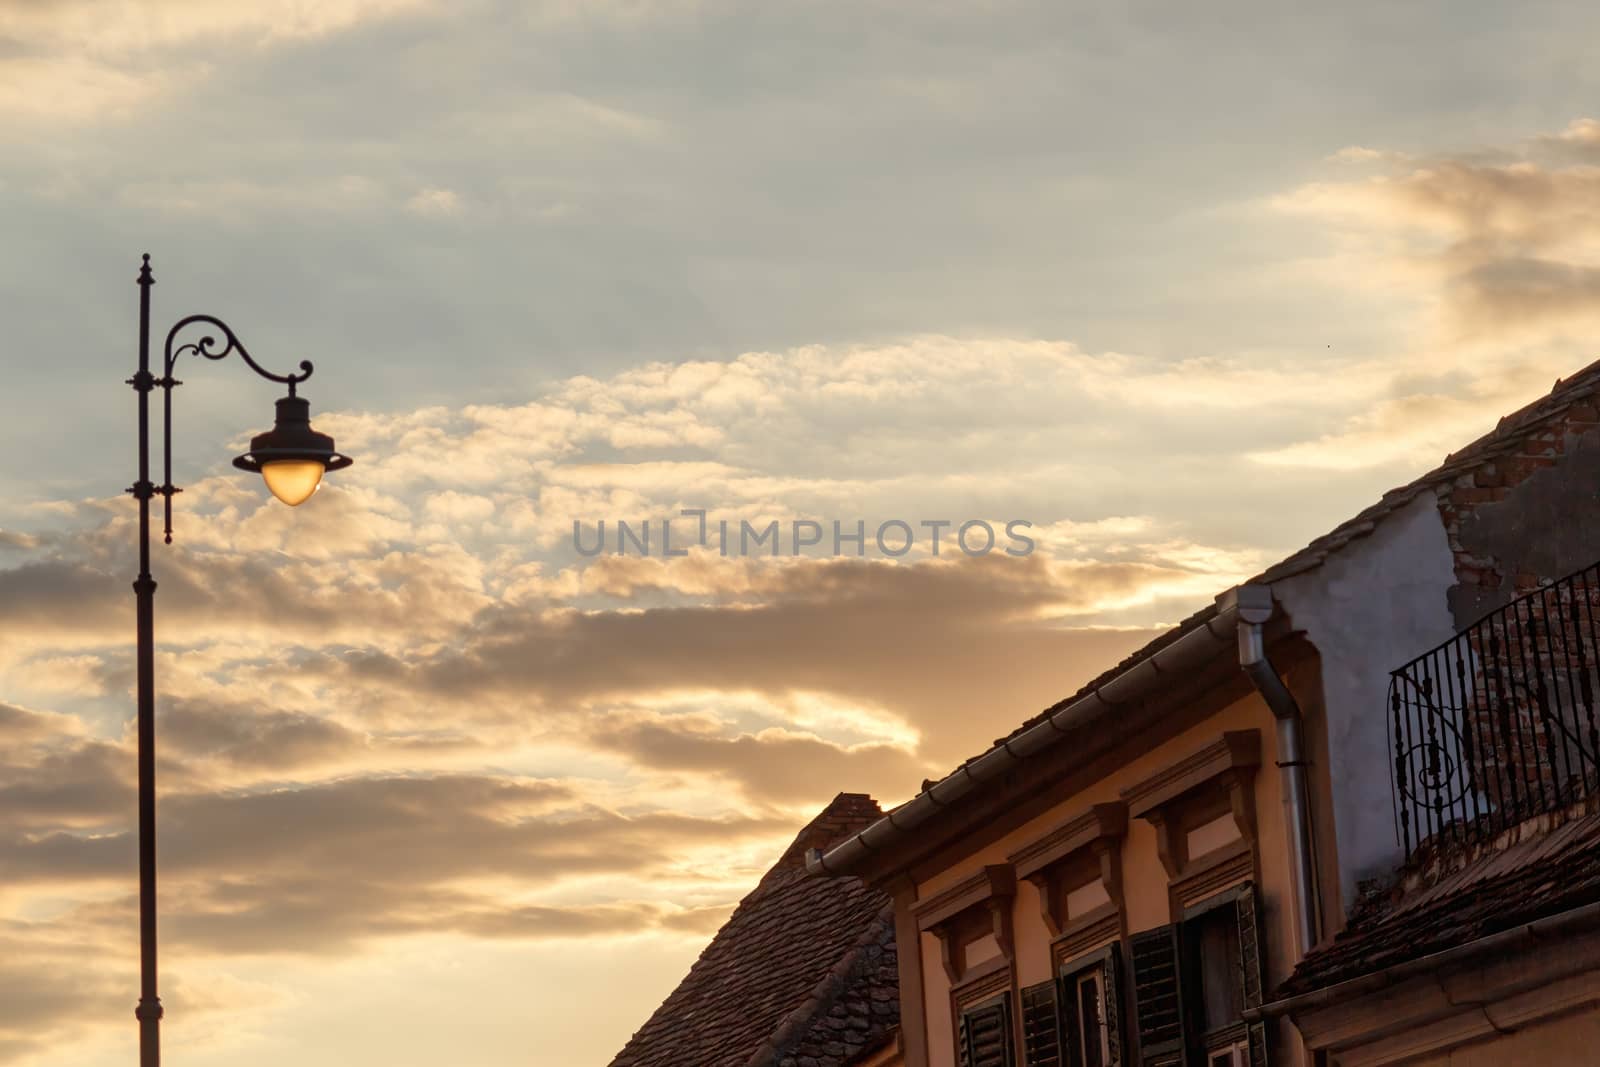 Concept of calm and serenity. Street lamp with colorful and cloudy sunset in the background. Sibiu, Romania, old medieval town in eastern central Europe.